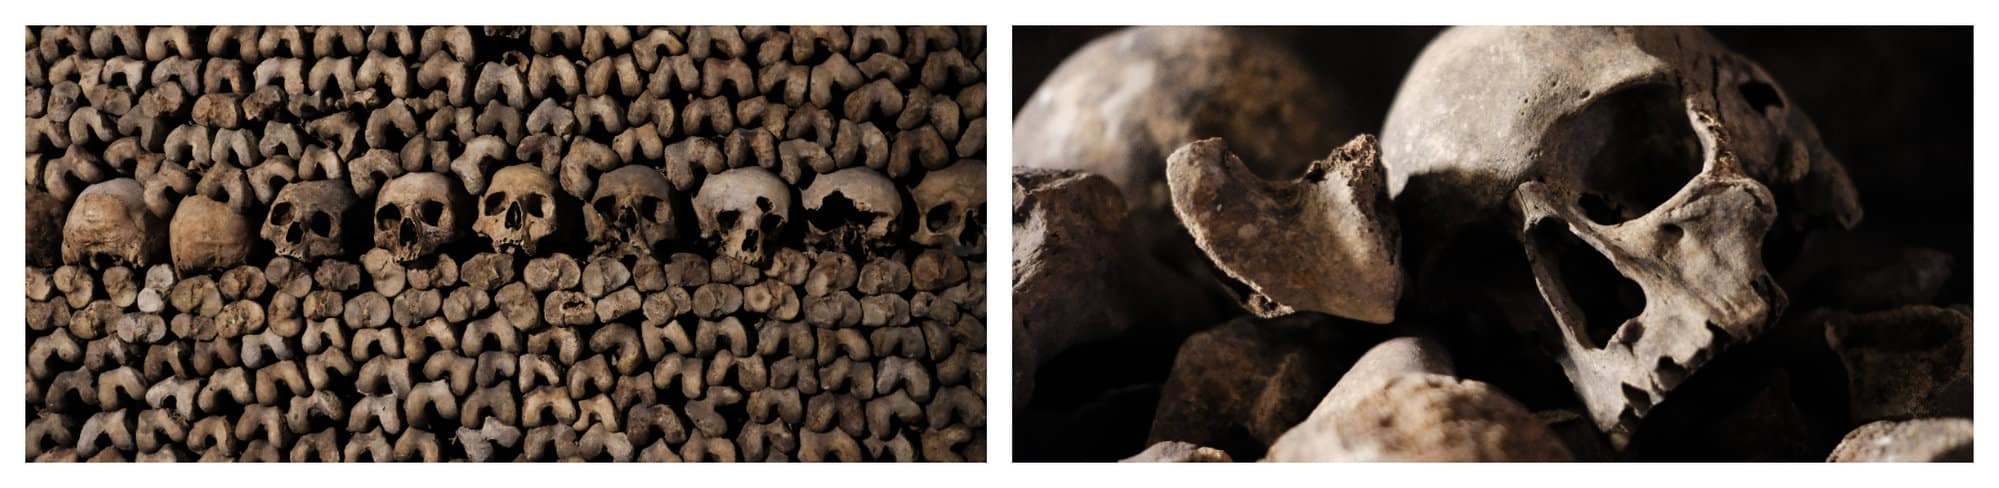 2 pictures of the stack of skulls and bones at the famous Catacombs of Paris.